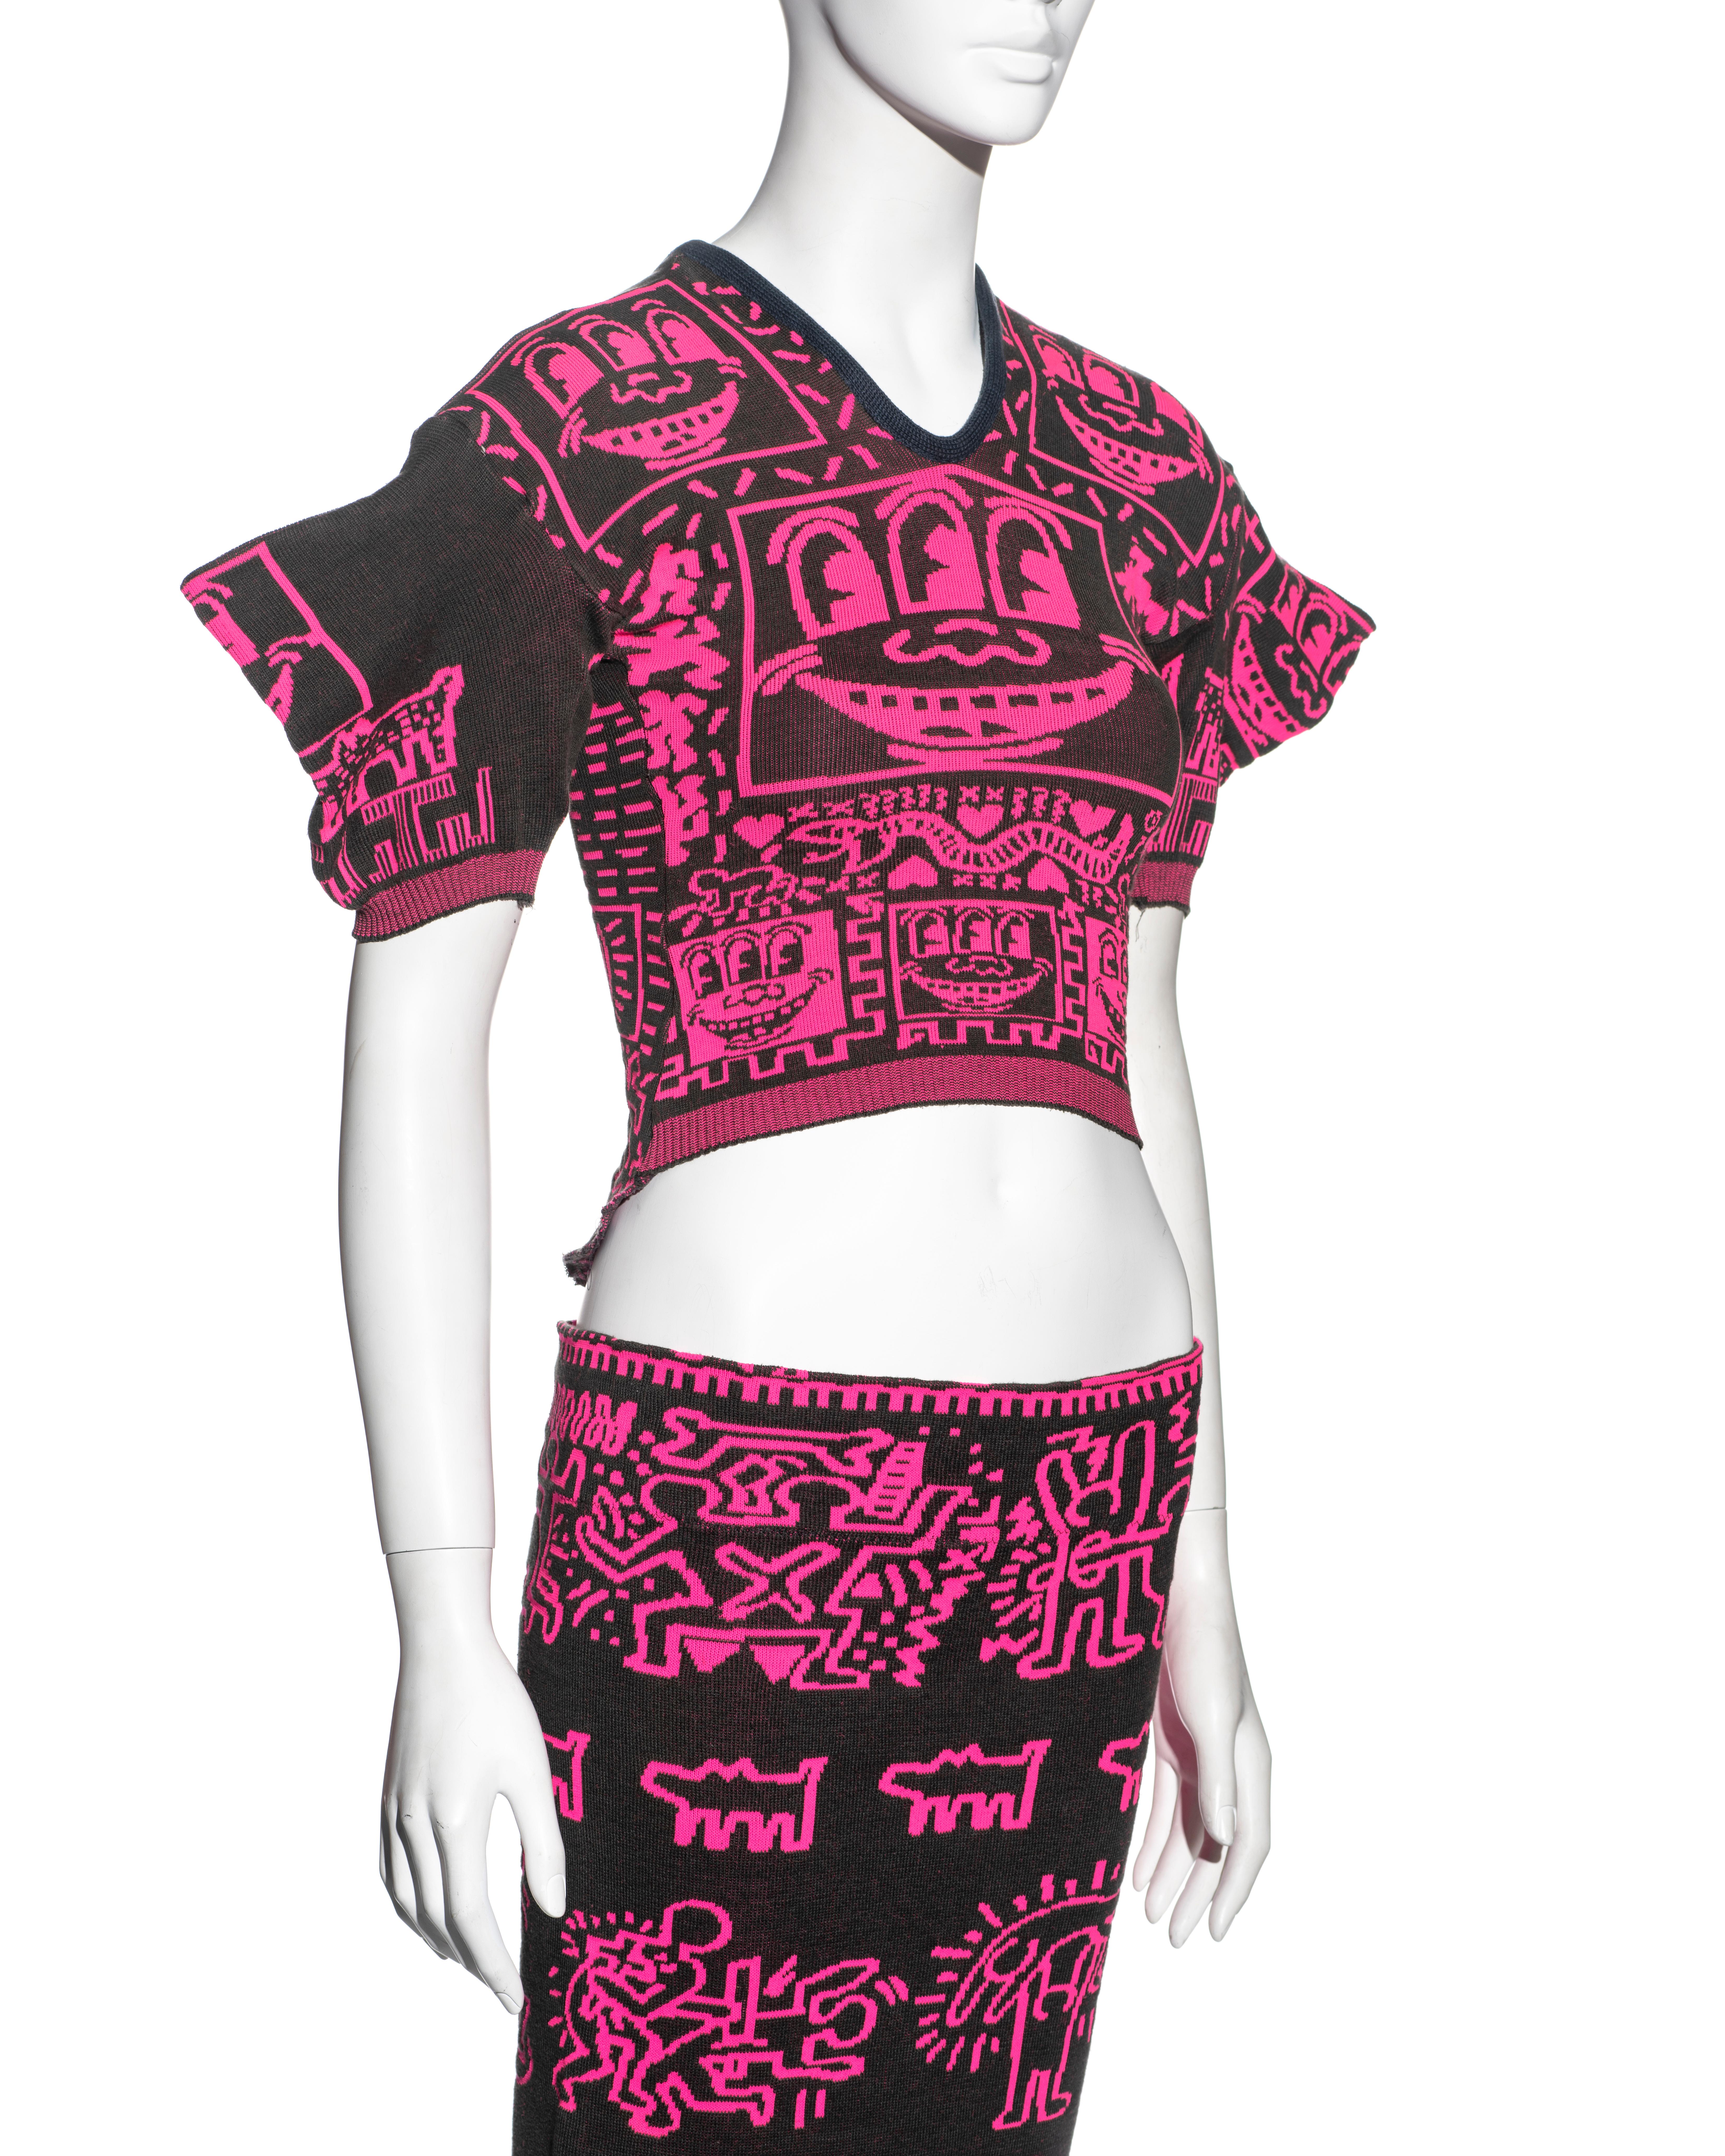 Vivienne Westwood x Malcolm McLaren x Keith Haring 'Witches' skirt suit, fw 1983 In Good Condition For Sale In London, GB